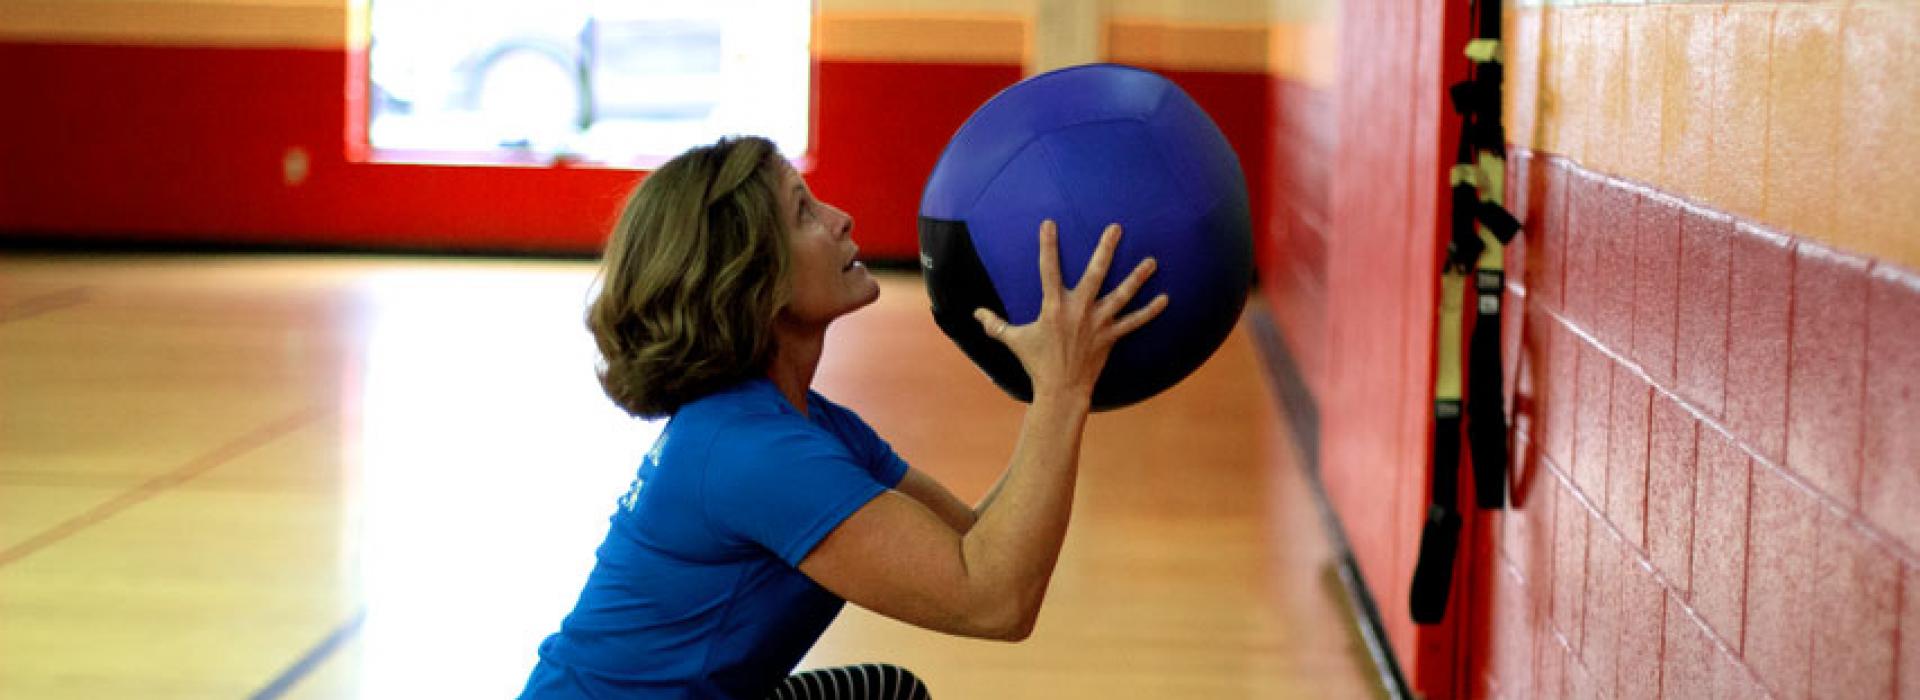 Oscar Lasko YMCA personal trainer Wendy Young demonstrates a workout with a weighted ball in the gym at the Oscar Lasko YMCA in West Chester PA